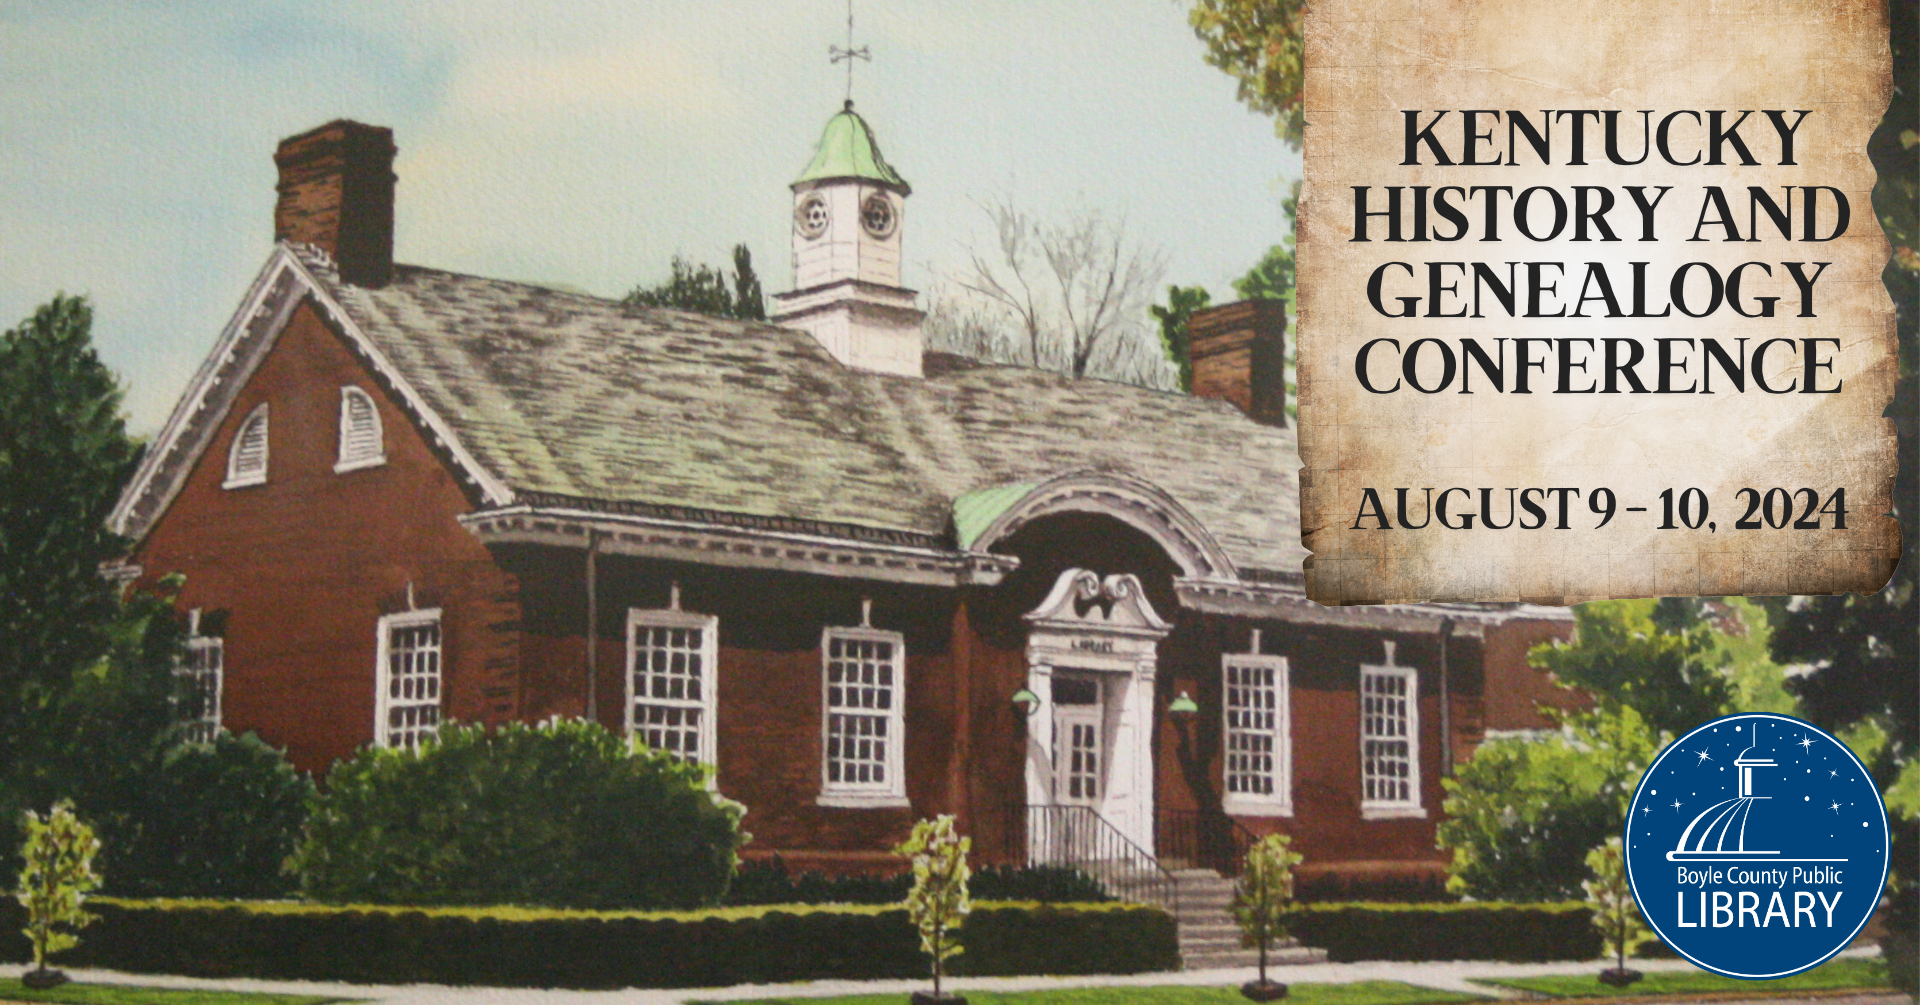 Kentucky History and Genealogy Conference: August 9-10, 2024